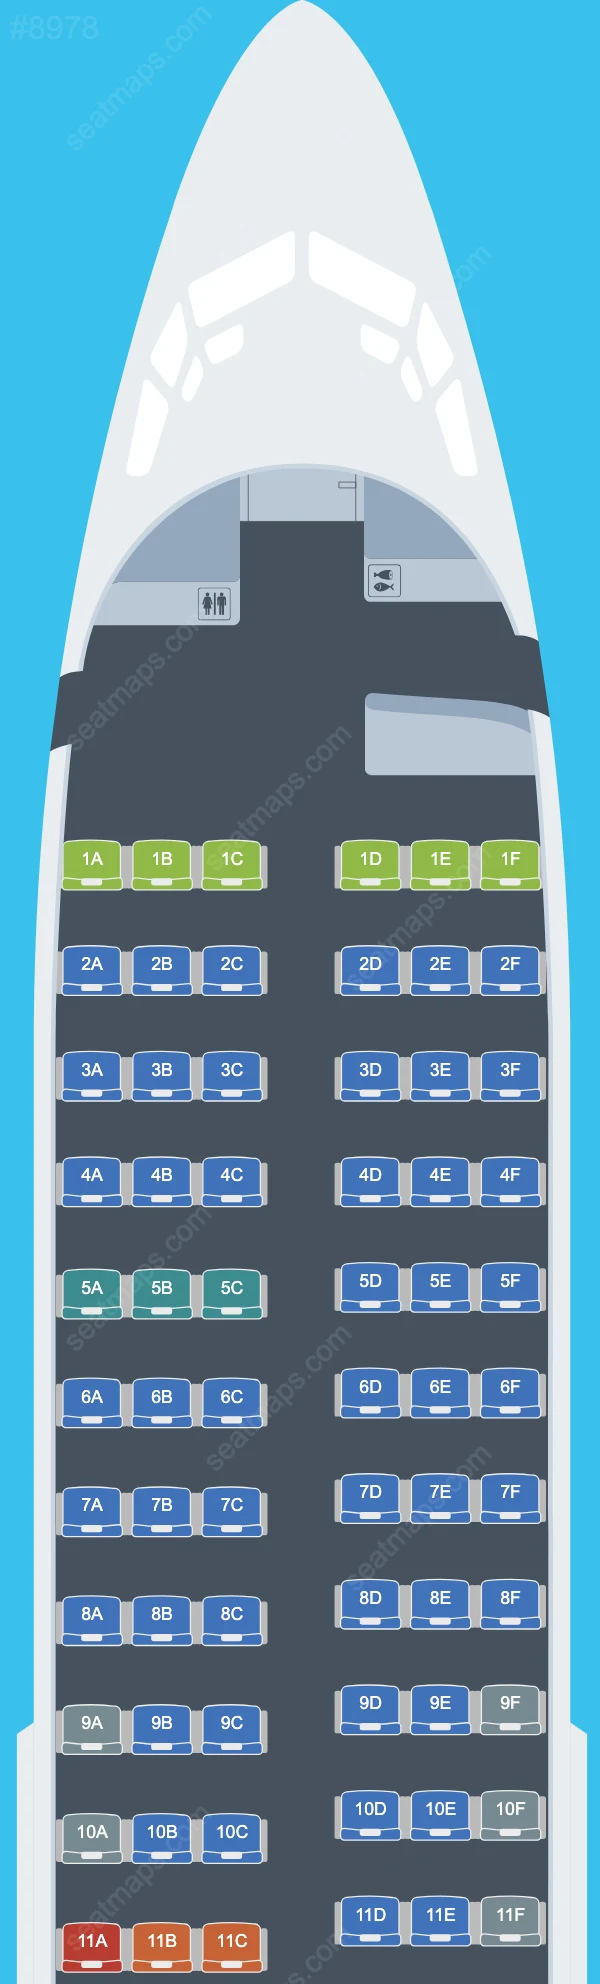 SkyUp Airlines Boeing 737 Seat Maps 737-700